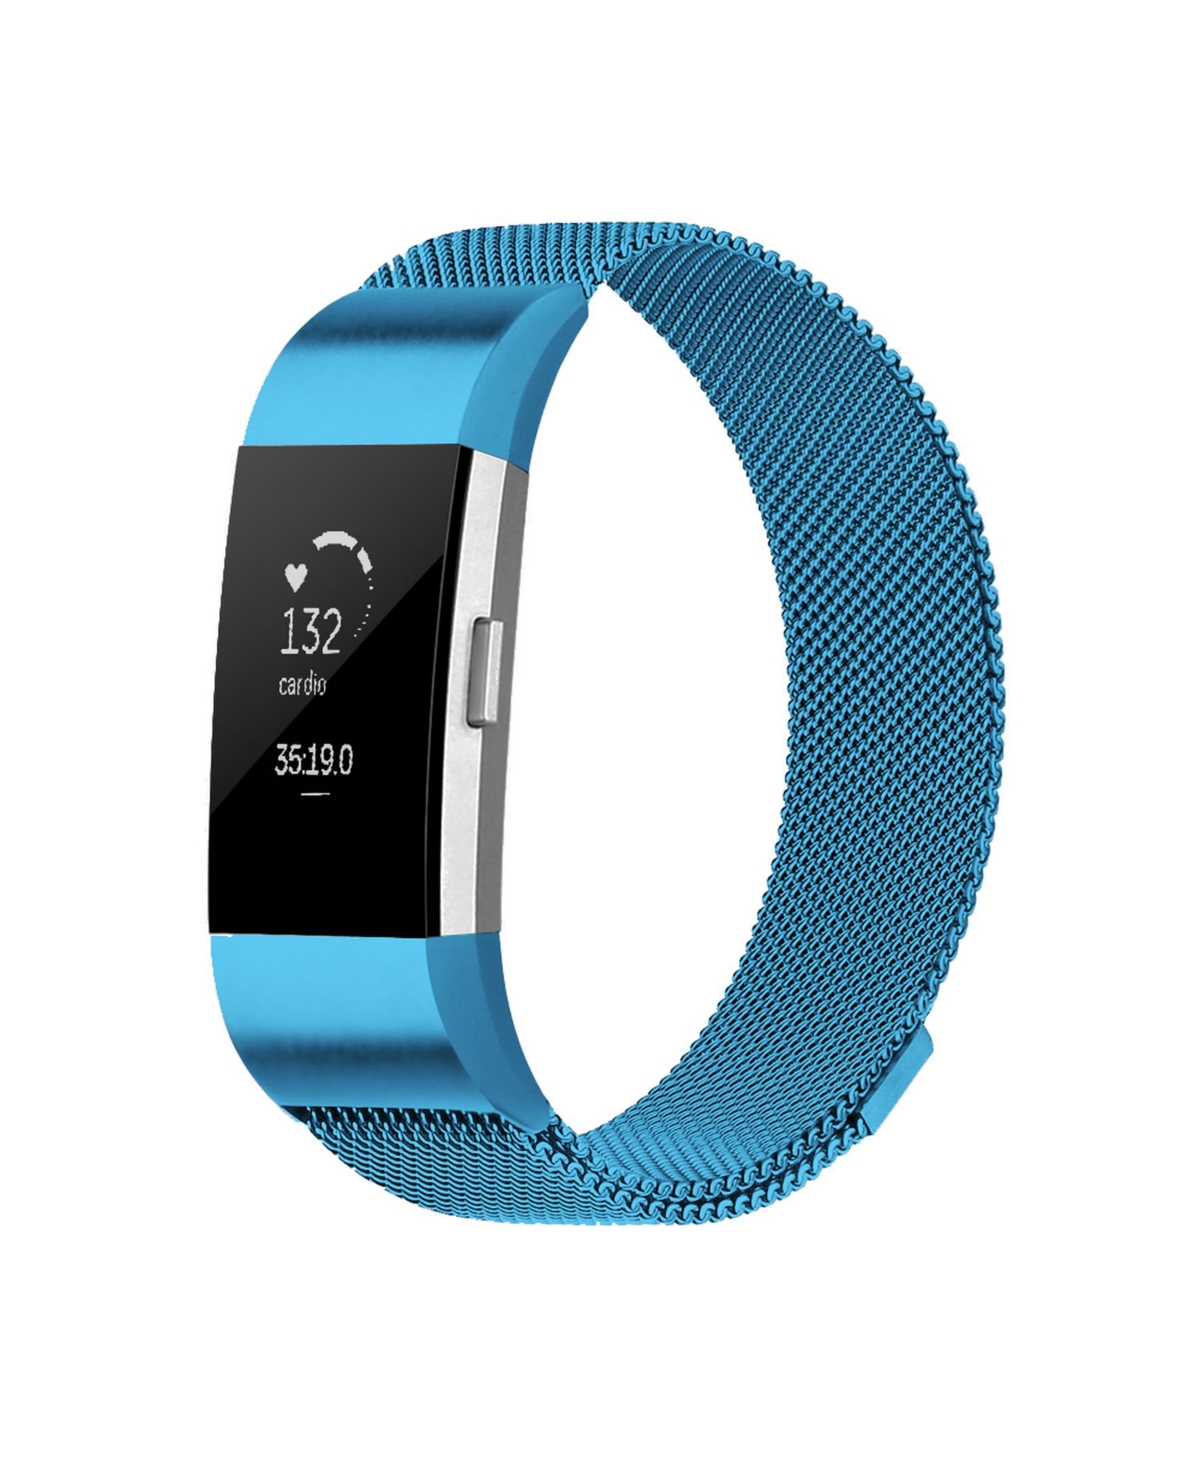 Unisex Fitbit Charge 2 Blue Stainless Steel Watch Replacement Band - Blue